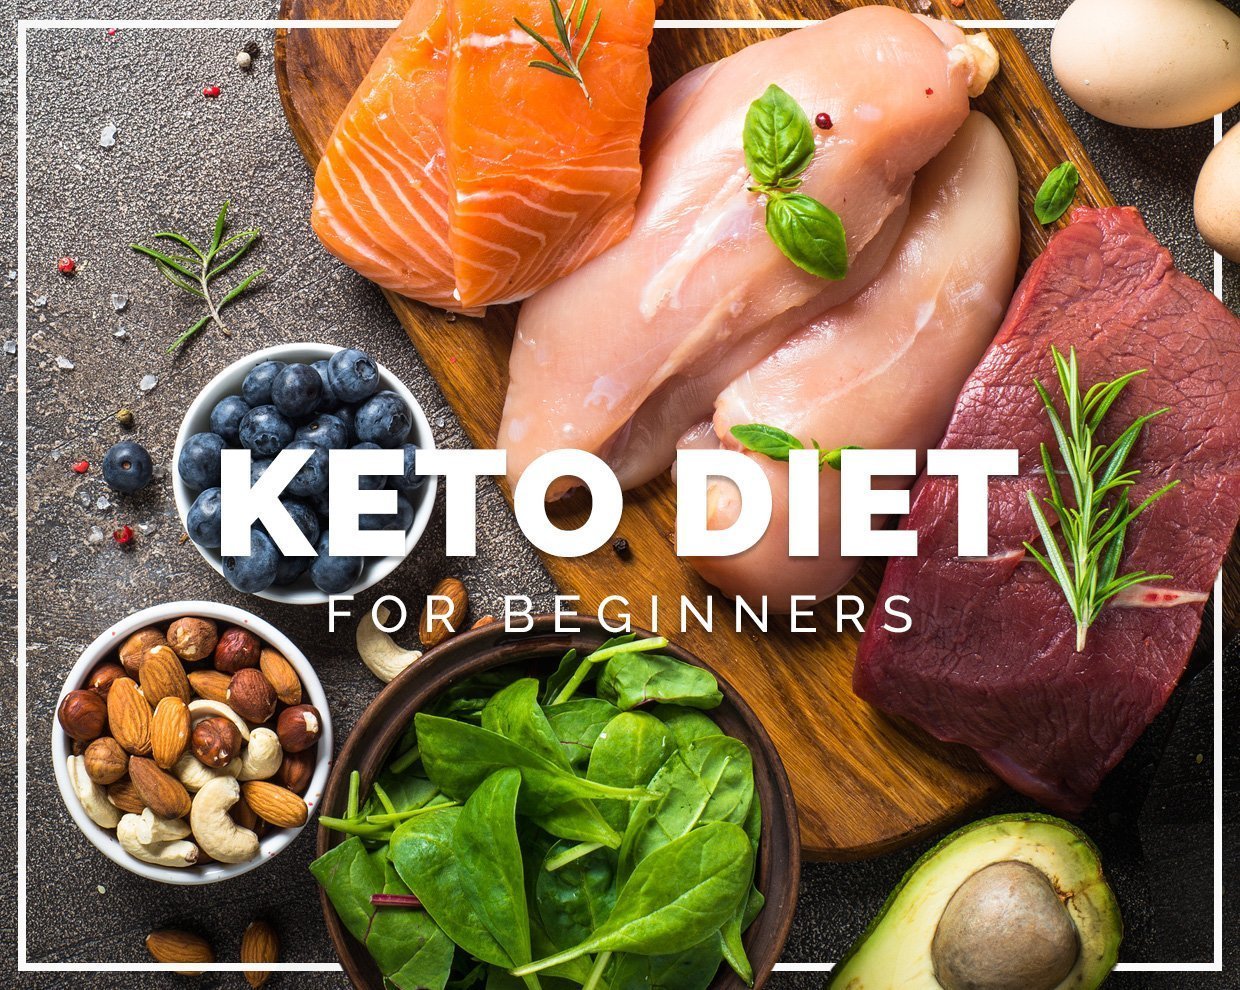 Ketogenic diet: Get fat-adapted in 4 easy steps